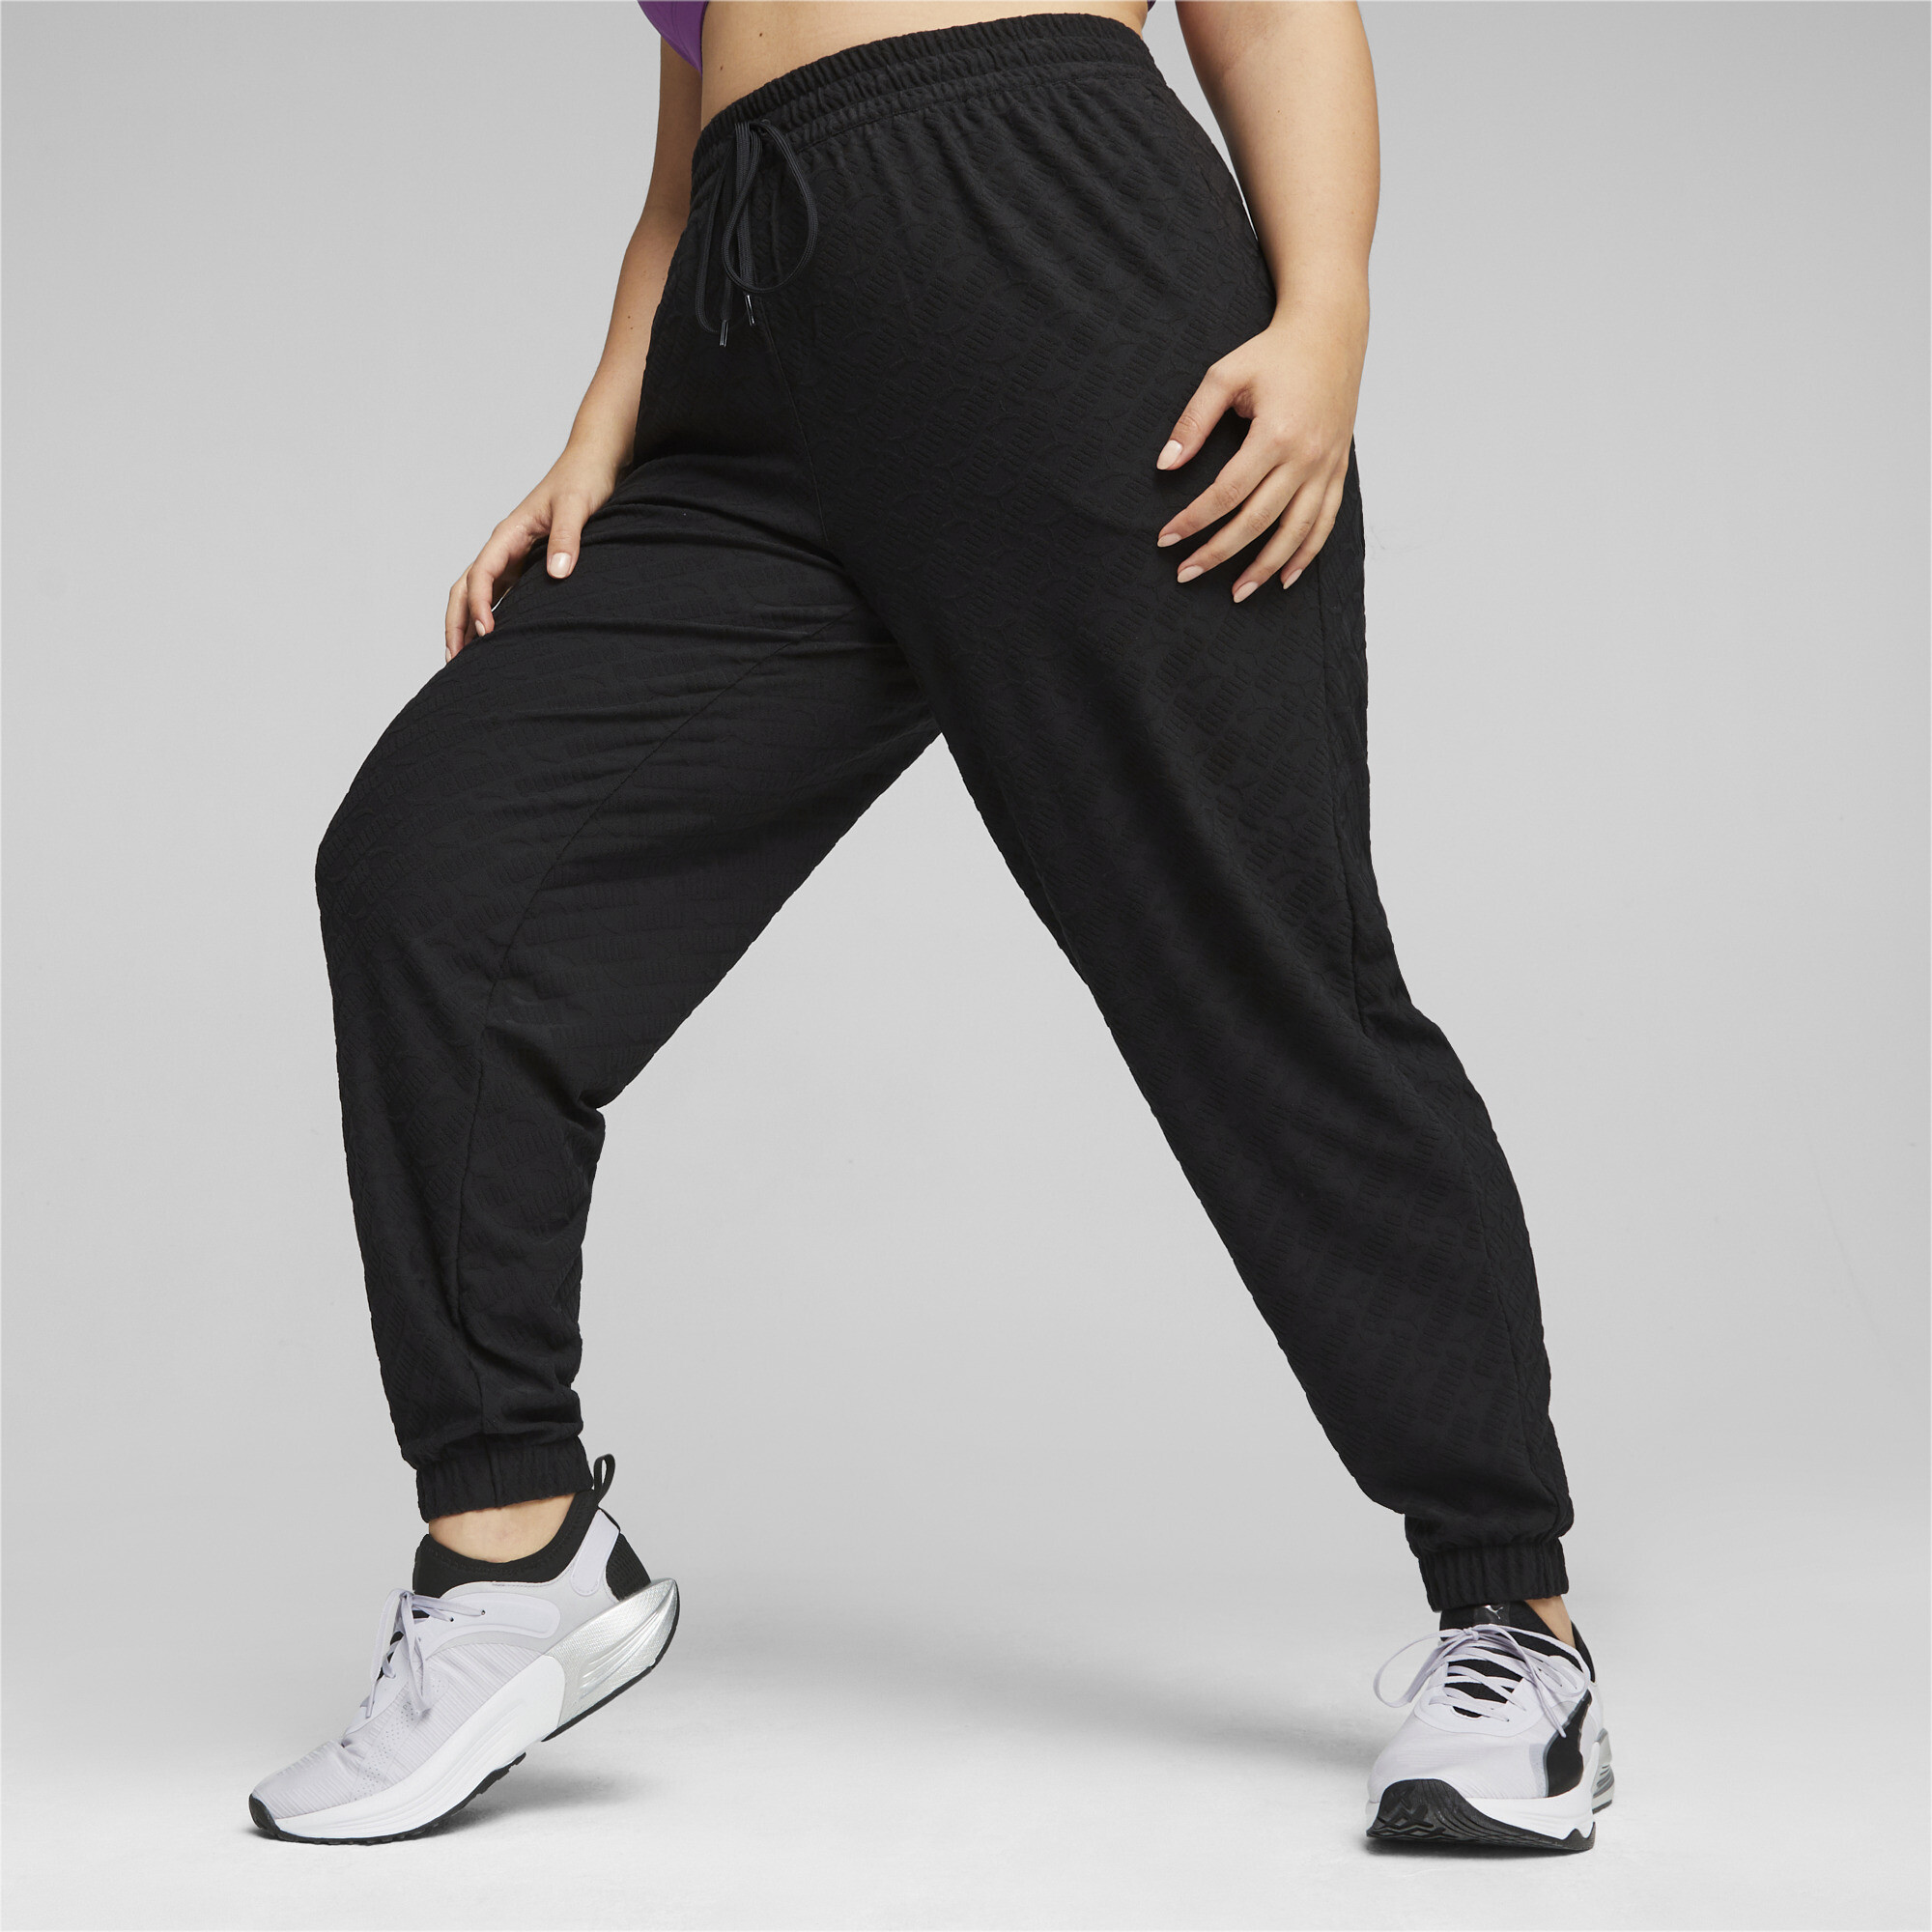 Women's PUMA Fit Training Branded Jogger In Black, Size XL